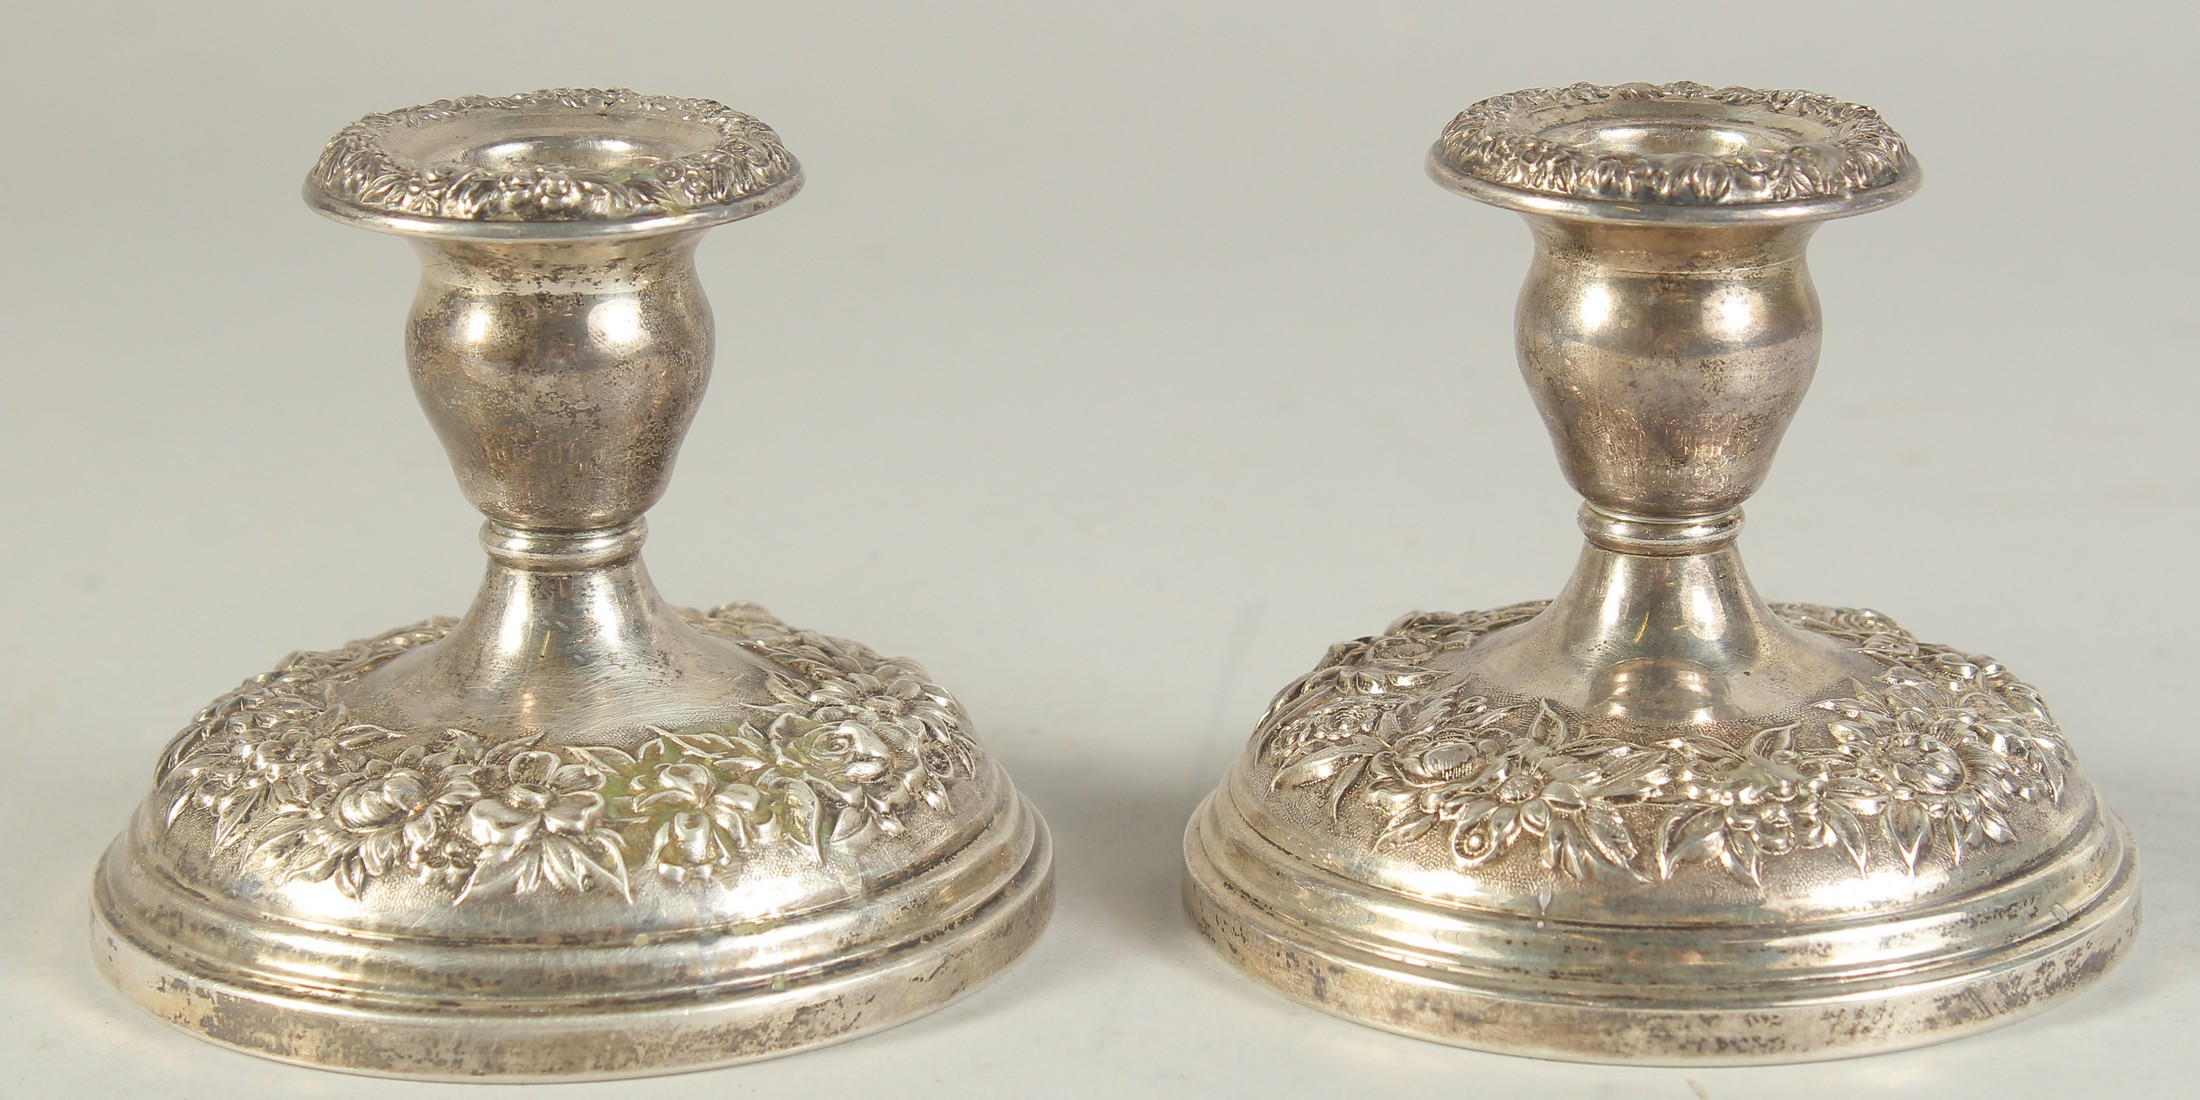 A PAIR OF SILVER EMBOSSED SQUARE CANDLESTICKS. 3.5ins high.